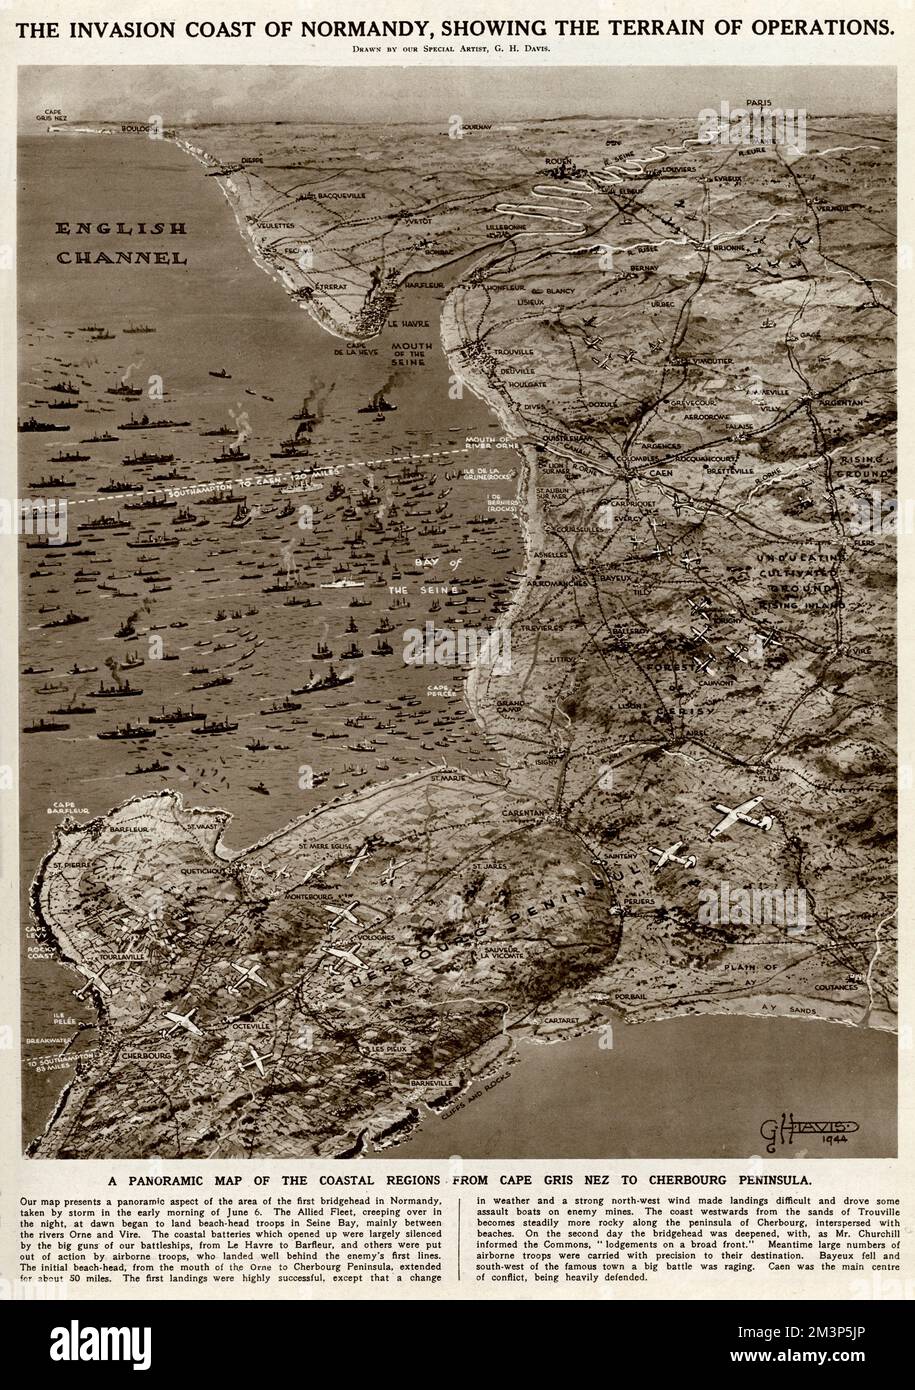 The invasion coast of Normandy, showing the terrain of operations during the Second World War.  A panoramic map of the coastal regions from Cap Gris Nez to the Cherbourg Peninsula. Stock Photo